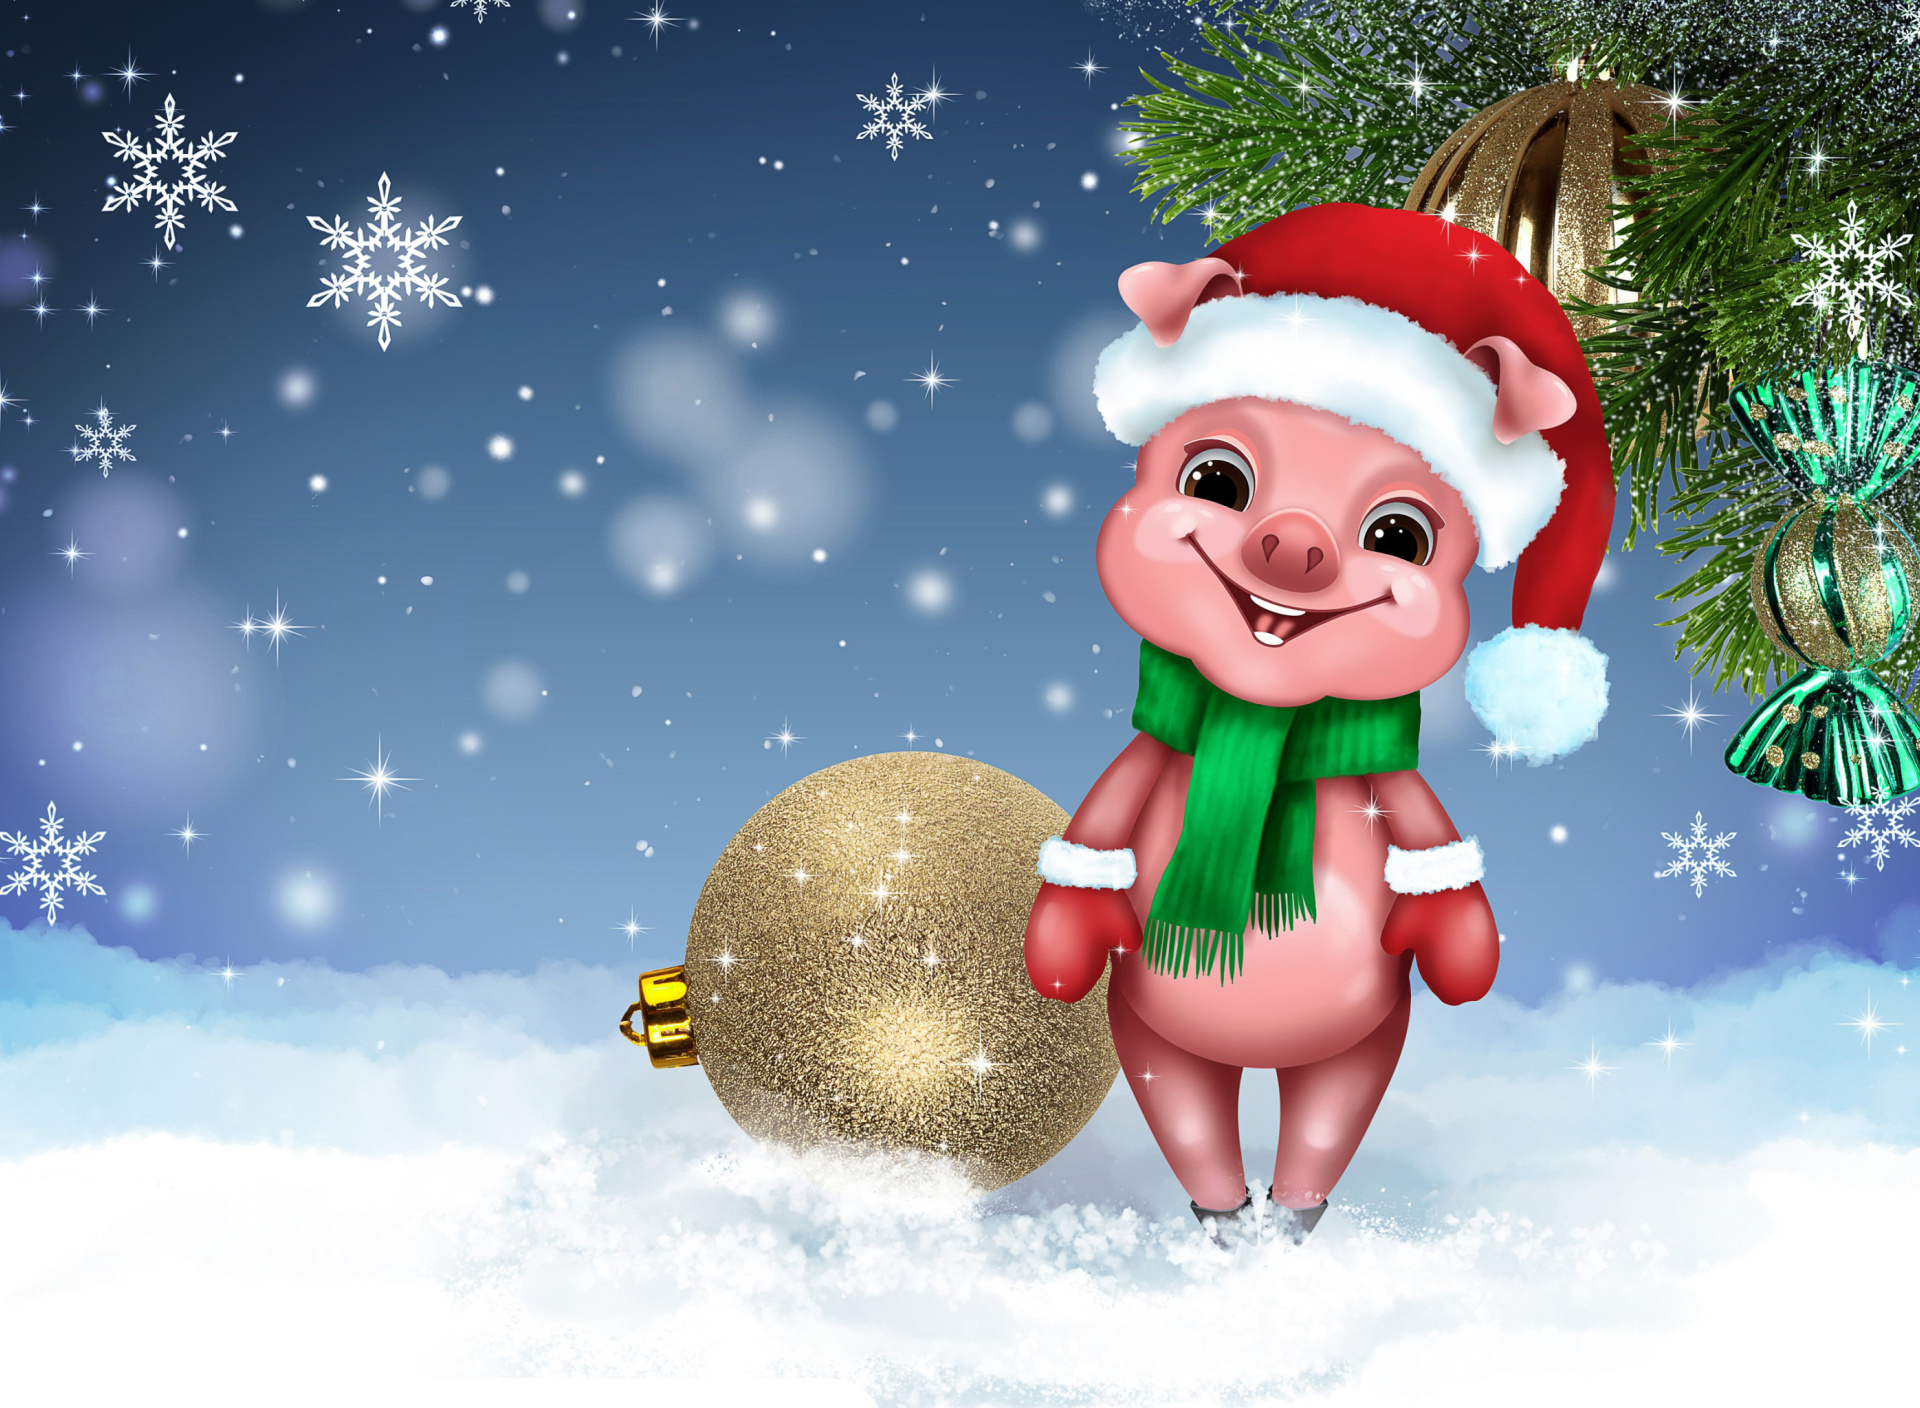 2019 Pig New Year Chinese Astrology wallpaper 1920x1408